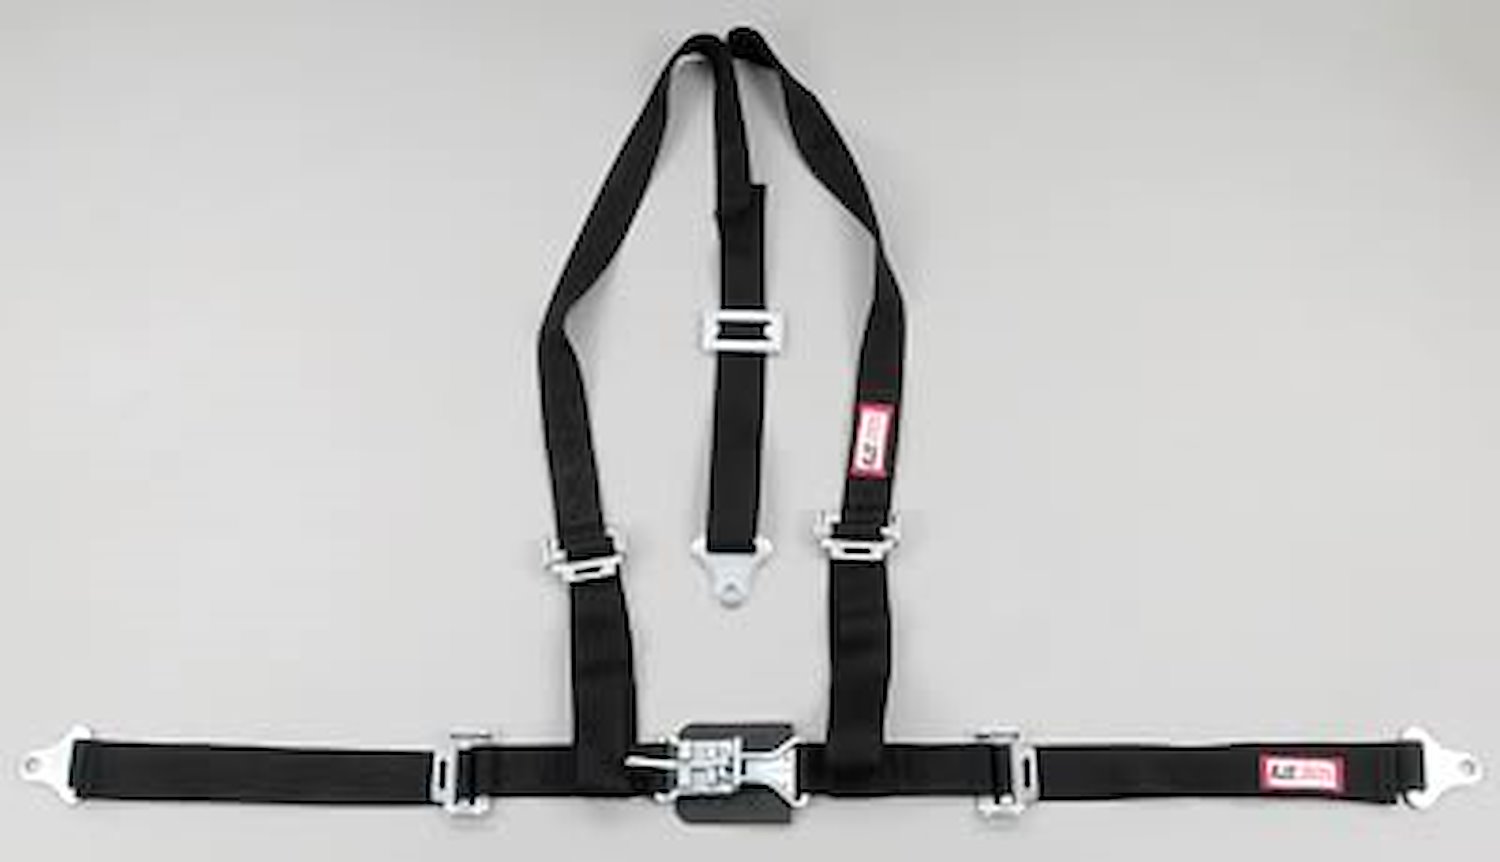 NON-SFI L&L HARNESS 3 PULL UP Lap Belt SEWN IN 2 Shoulder Harness V ROLL BAR Mount w/STERNUM STRAP ALL WRAP ENDS PURPLE